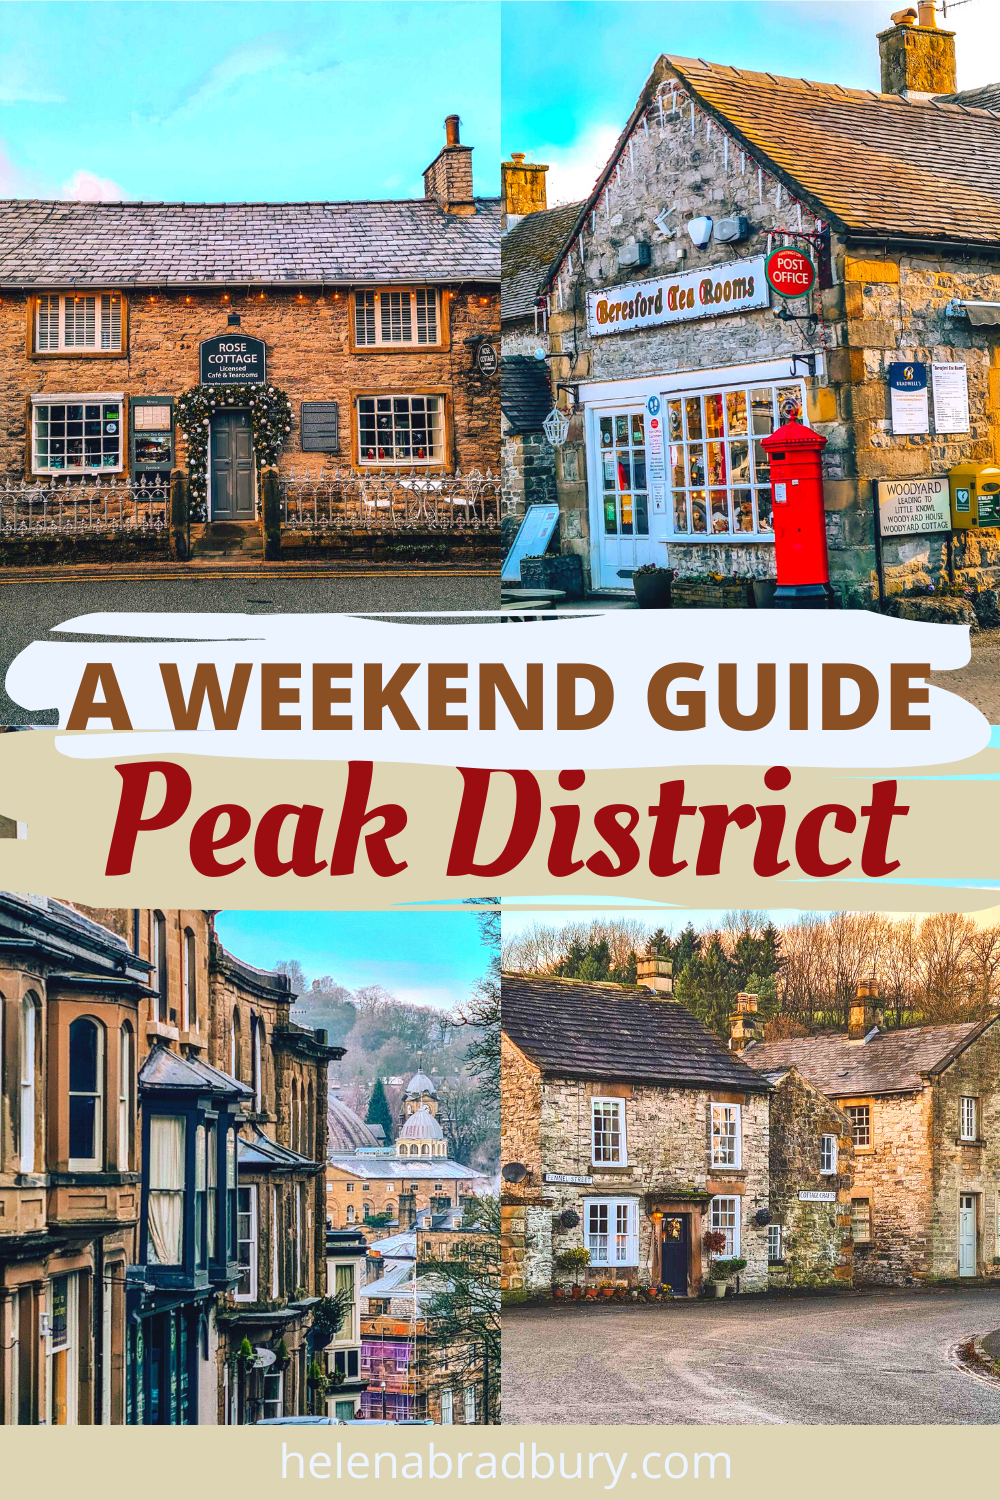 The Peak District National Park is one of the most beautiful places in the UK and is perfect for a weekend trip in the UK with plenty of outdoor activities, fun things to do and beautiful villages | peak district walks | visiting chatsworth house | …